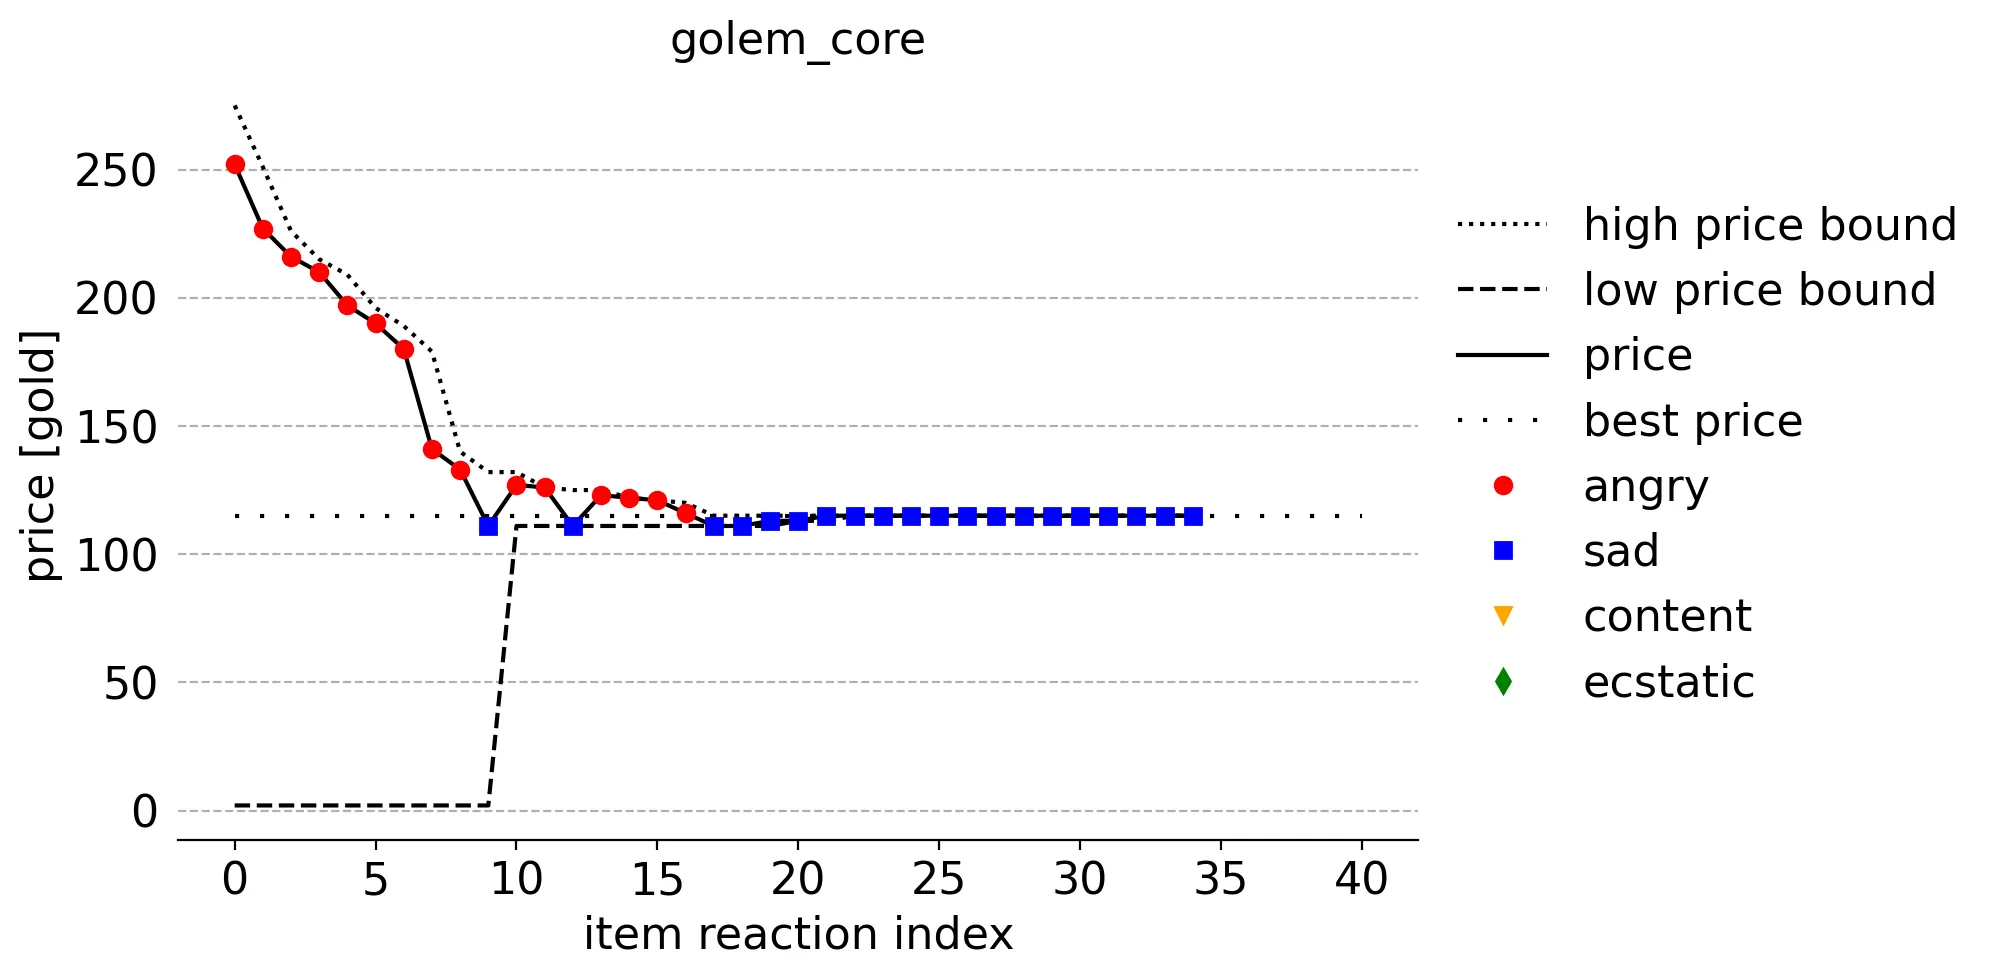 
    Figure for golem core showing the price and reaction for every reaction of the item as
    it occurs.
    Includes algorithm's understanding of ideal price range BEFORE the reaction and ideal price.
    Shows 9 decreasing angry reactions, each limiting upper bound in next step, then a sad reaction
    just below the ideal price that limits the lower bound.
    A couple of angry reactions are followed by a content reaction, then 4 angry reactions, and,
    finally, the algorithm converges on sad reactions on the ideal price.
  